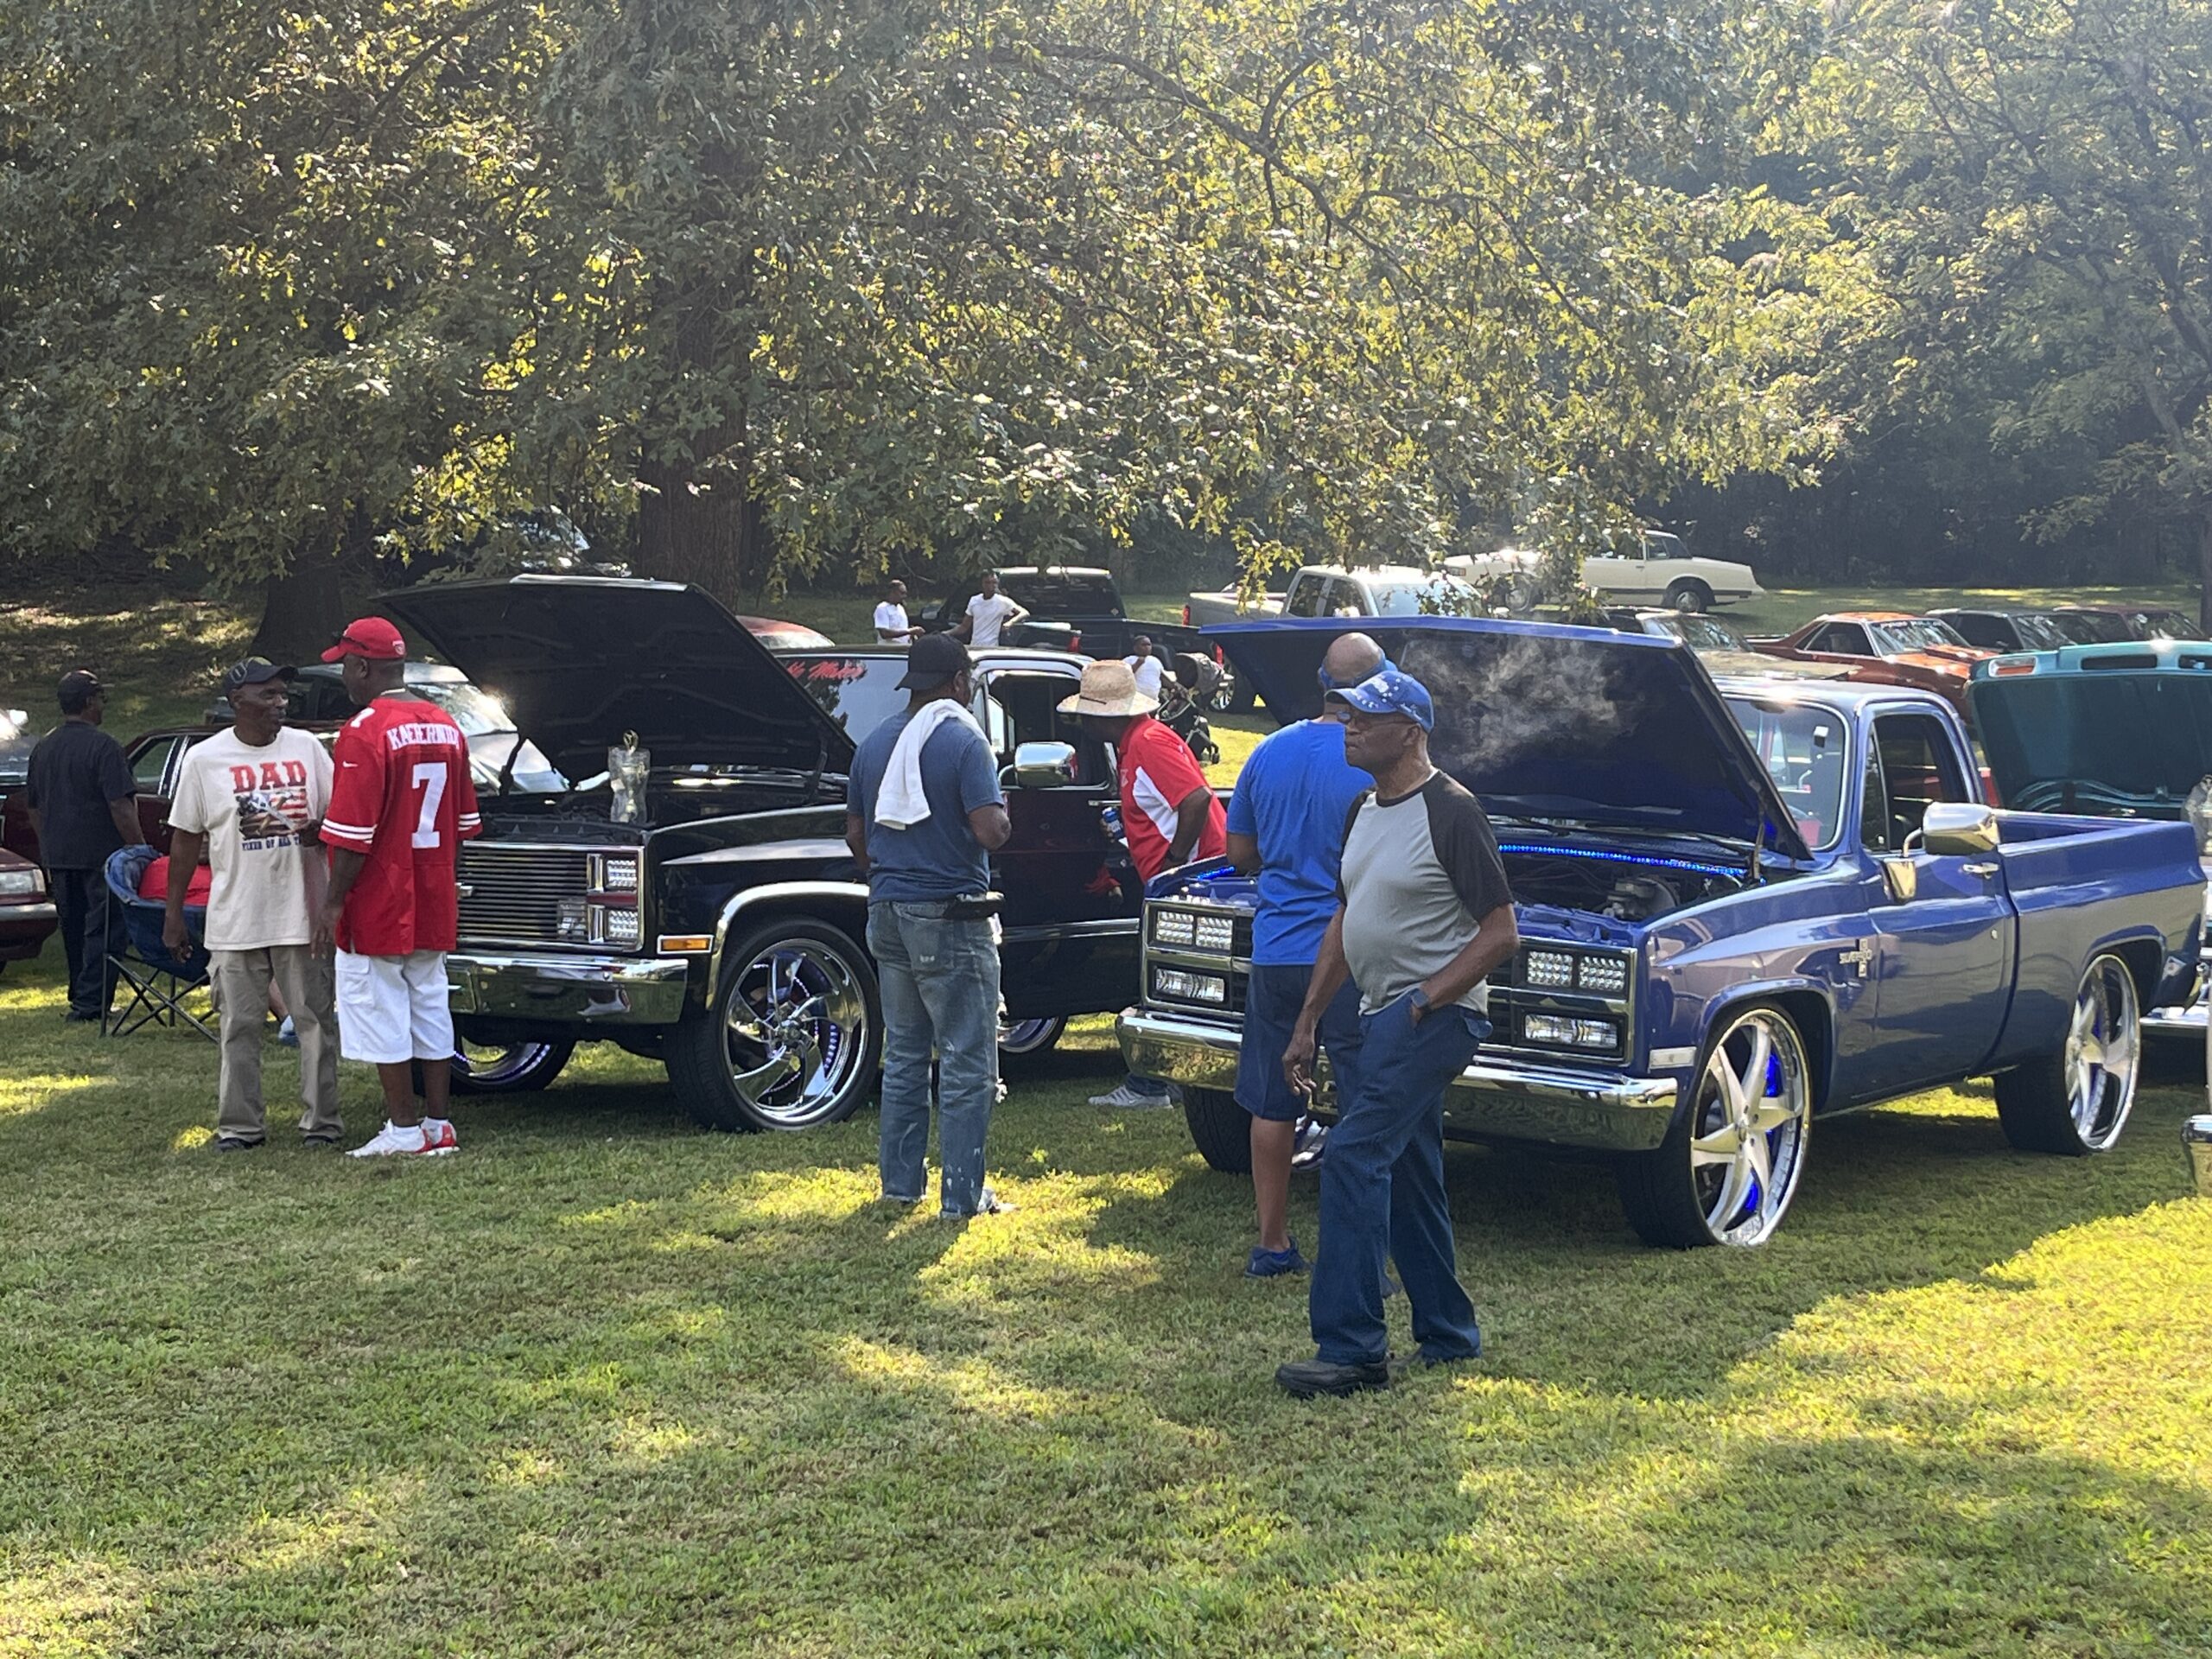 The Annual Car Show on Guffin Road